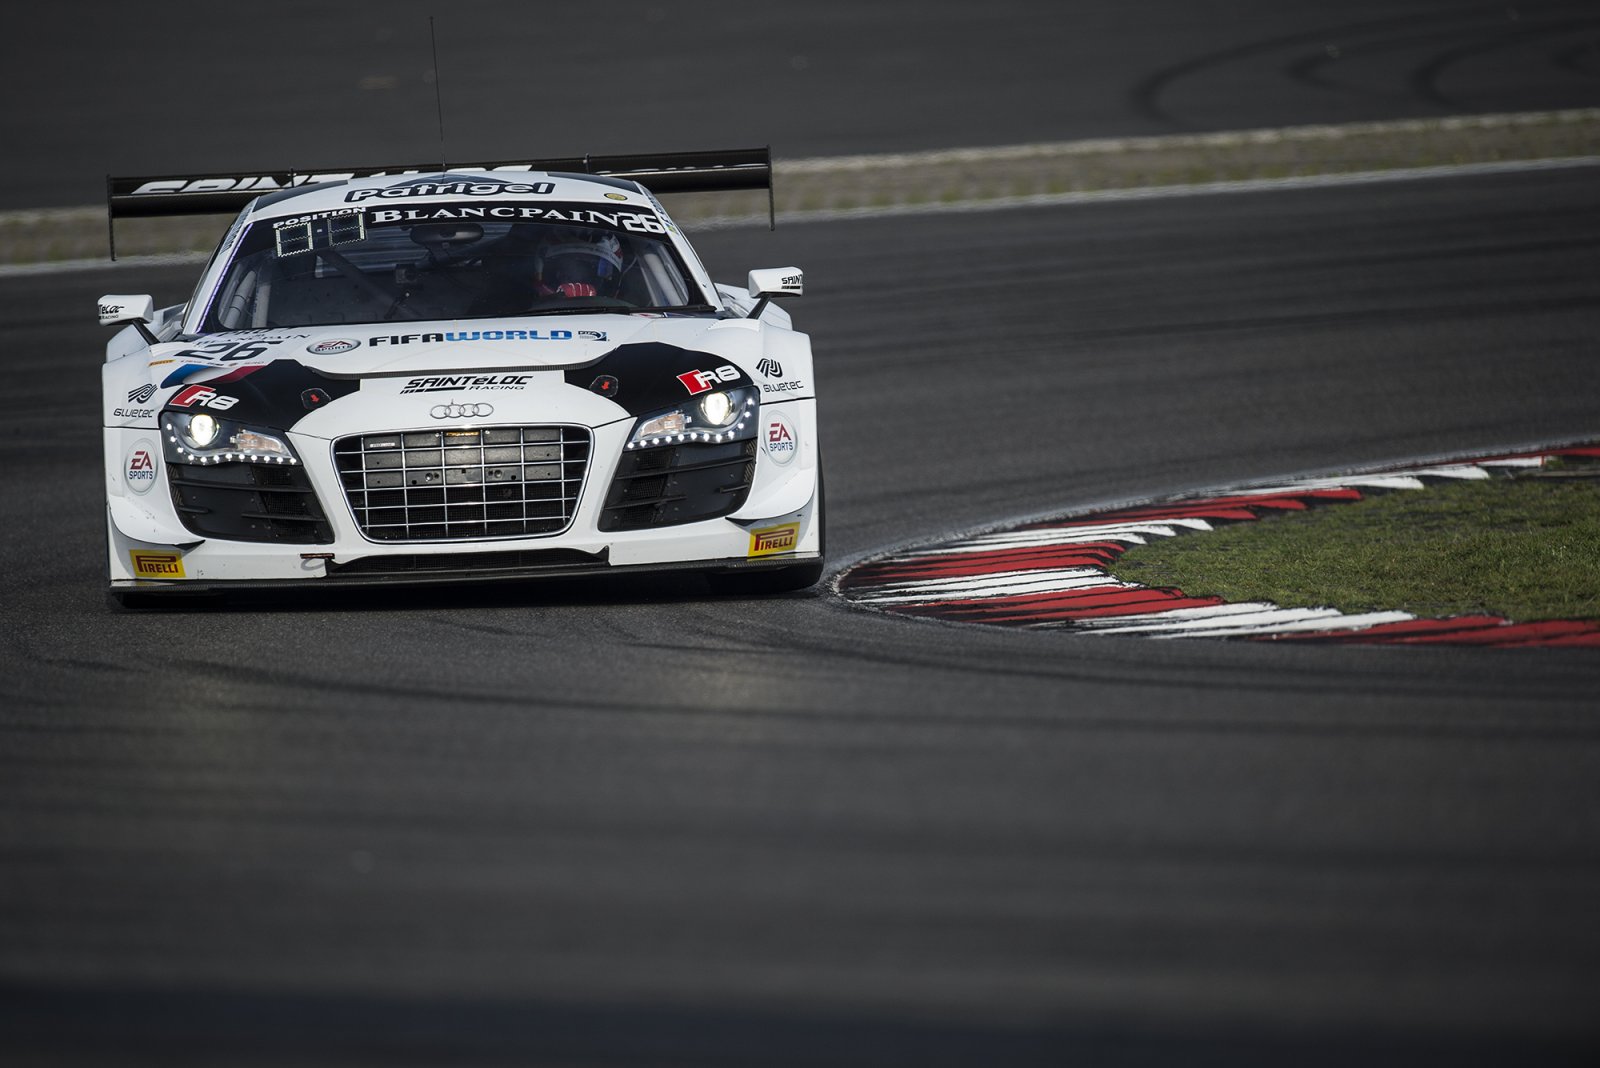 Audi 1-2-3 in Free Practice session